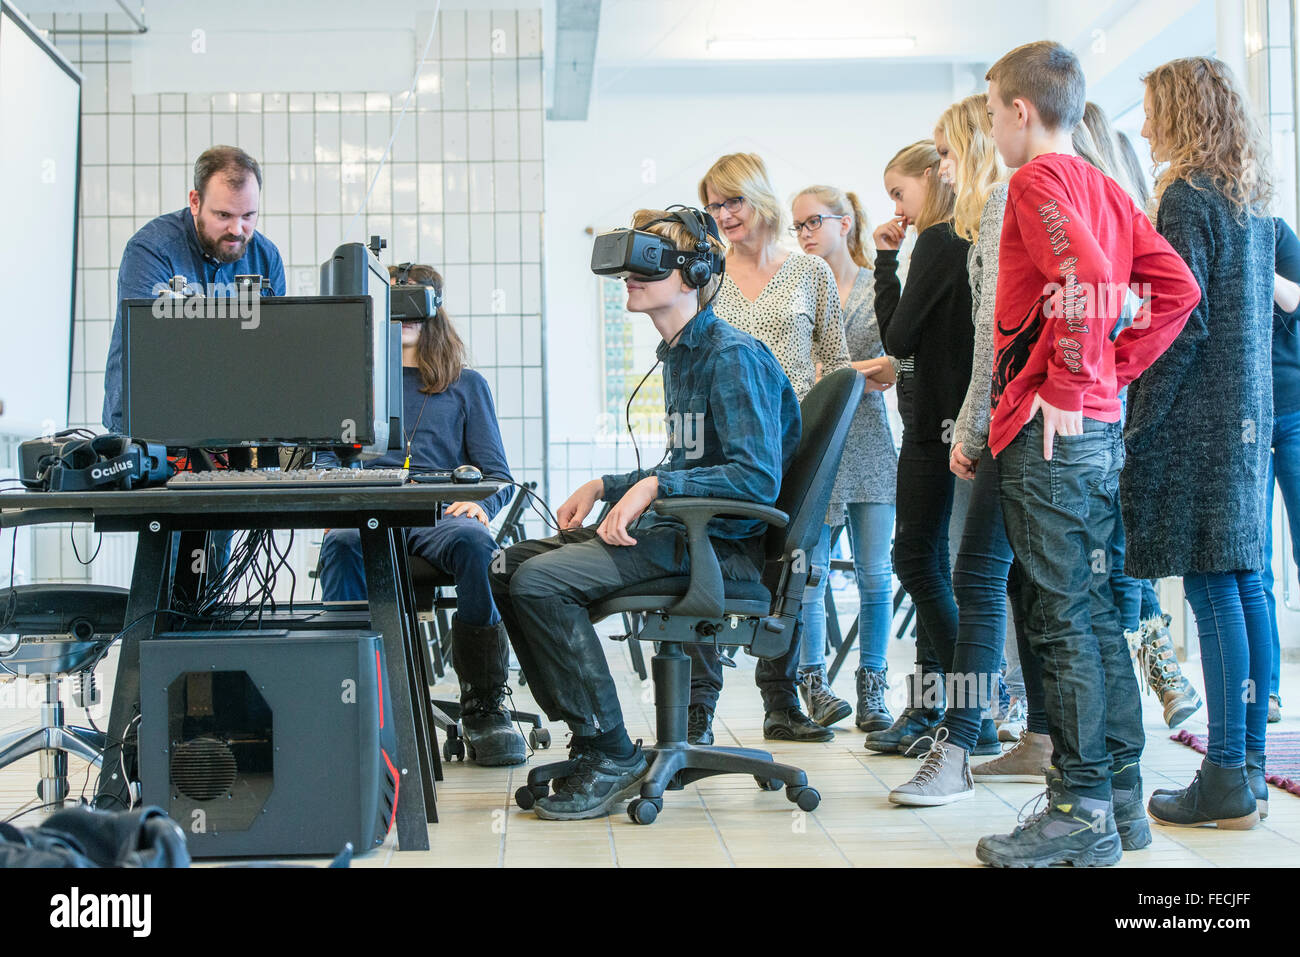 Copenhagen, Denmark. 5th February, 2016. Khora is a pop-up space in the meatpacking district of Copenhagen, where people can walk in and try different levels of virtual reality. Schools will be able to come in on field trips, companies can come in to see what is possible with VR. VR enthusiasts will be able to come in and collaborate with fellow content creators. Their goal is to create an environment where ideas about virtual reality can develop and come to life.  Pictured is 14-year-old Malte Konoy, from Albertslund Lilleskole, as he tests out one of the VR headsets. © Matthew James Harrison Stock Photo